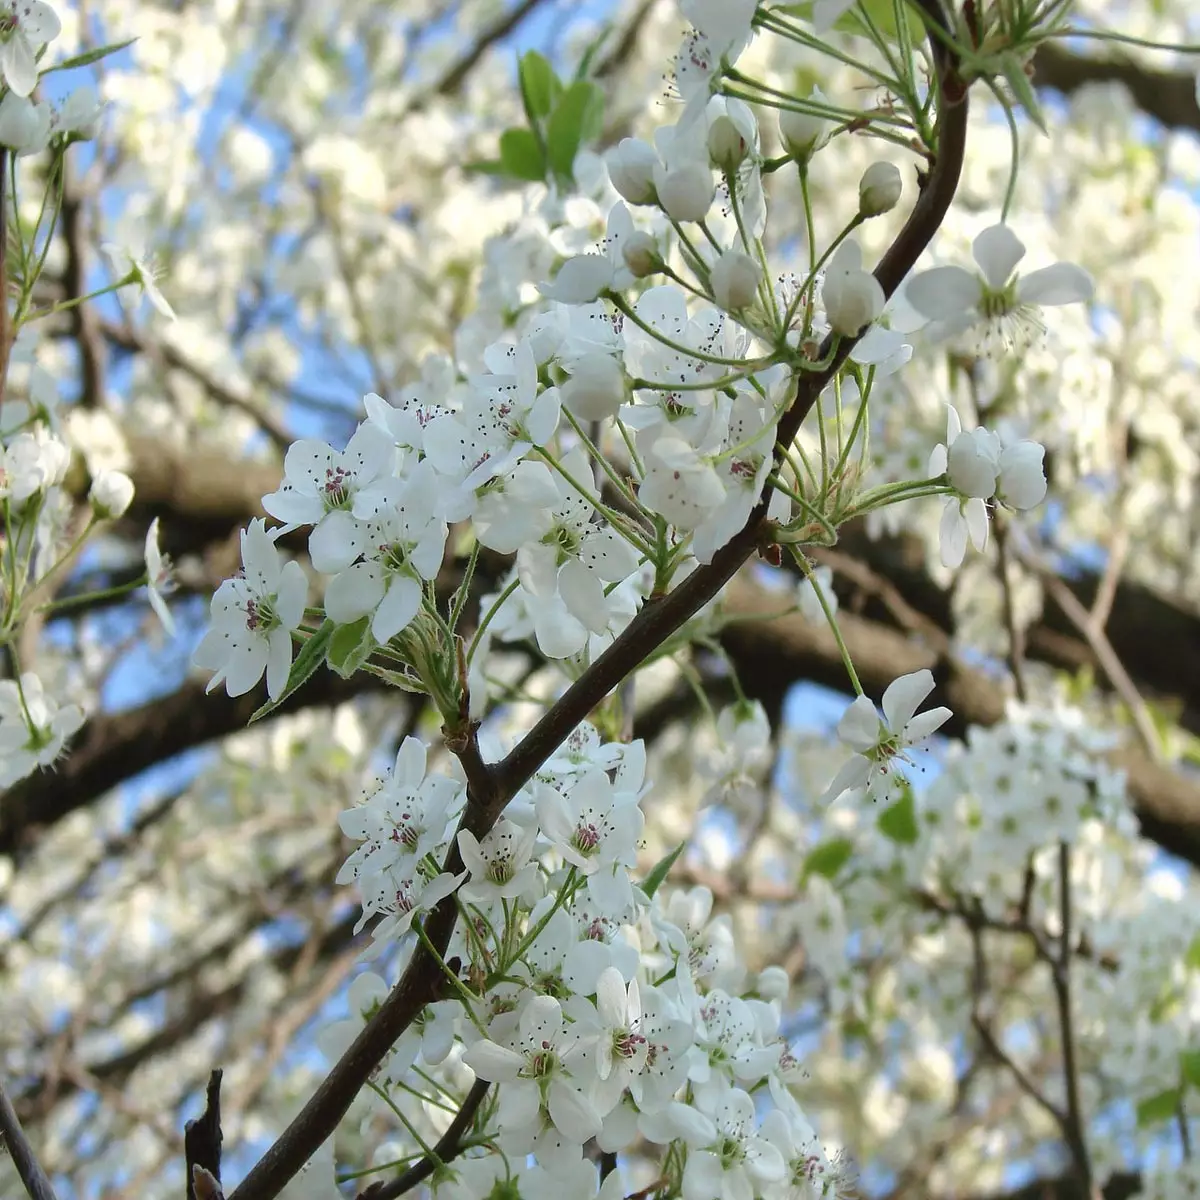 Cleveland Pear Tree flowers